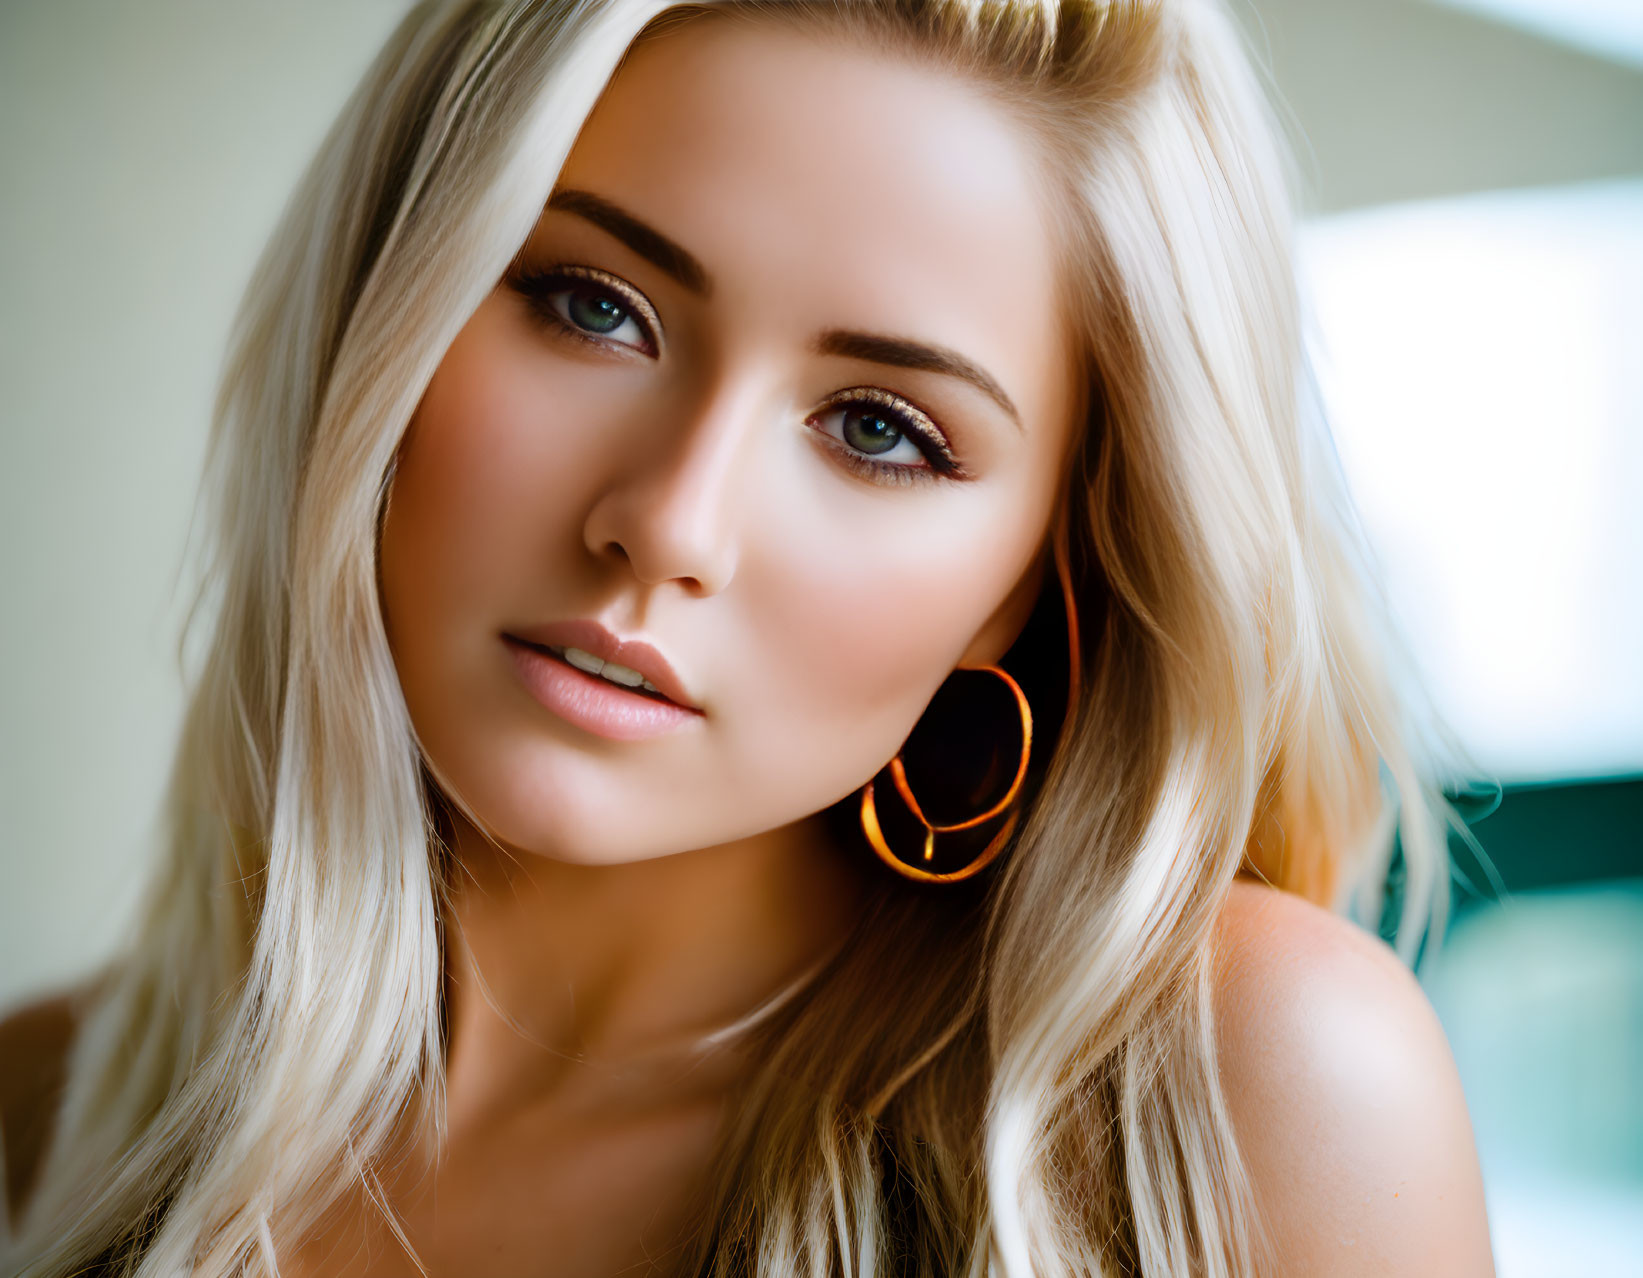 Blonde woman portrait with hoop earrings and subtle makeup